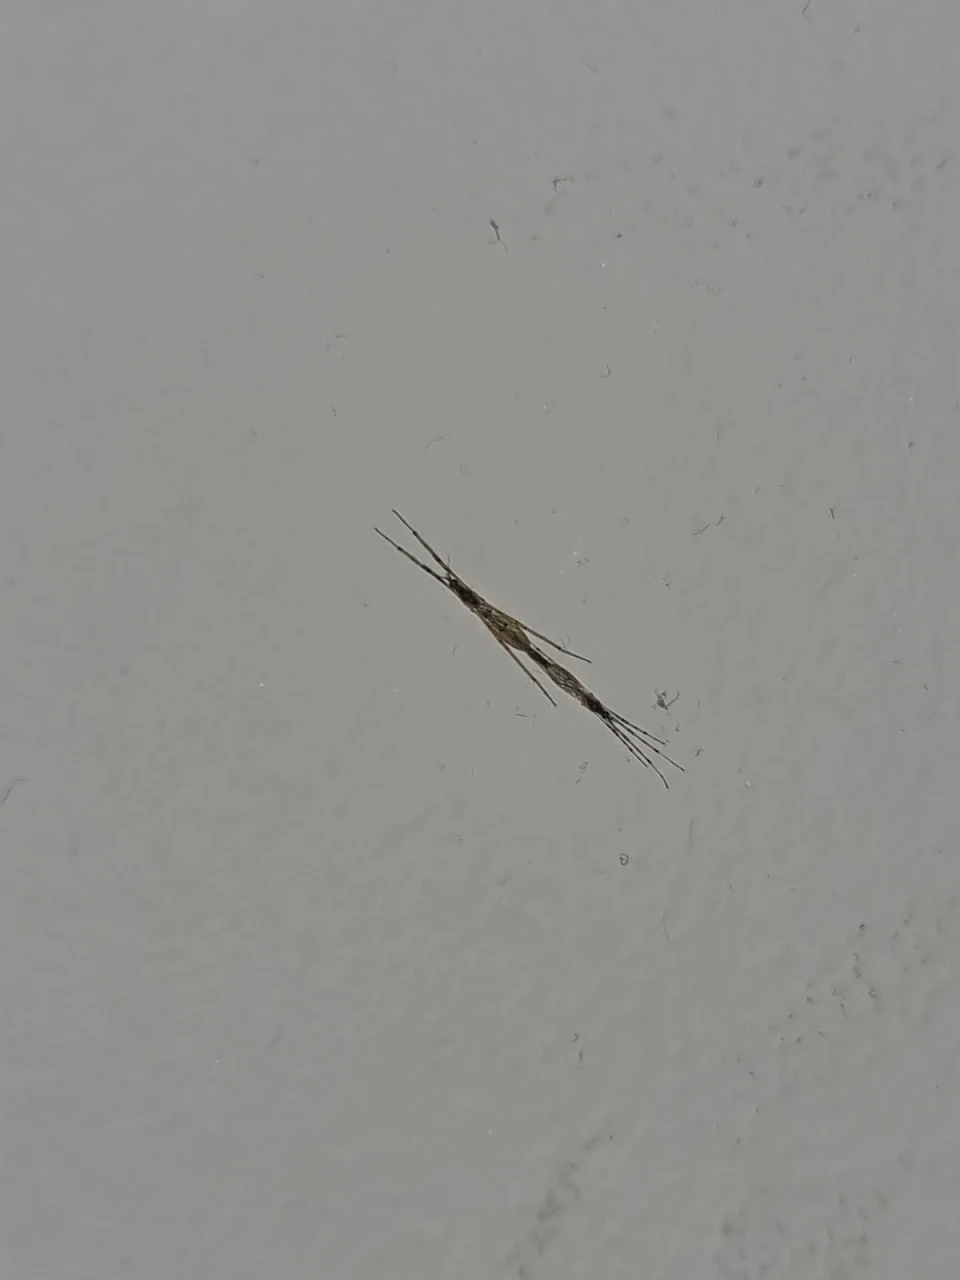 Found this in my room in Singapore, about 2cm long. anyone know what's this?